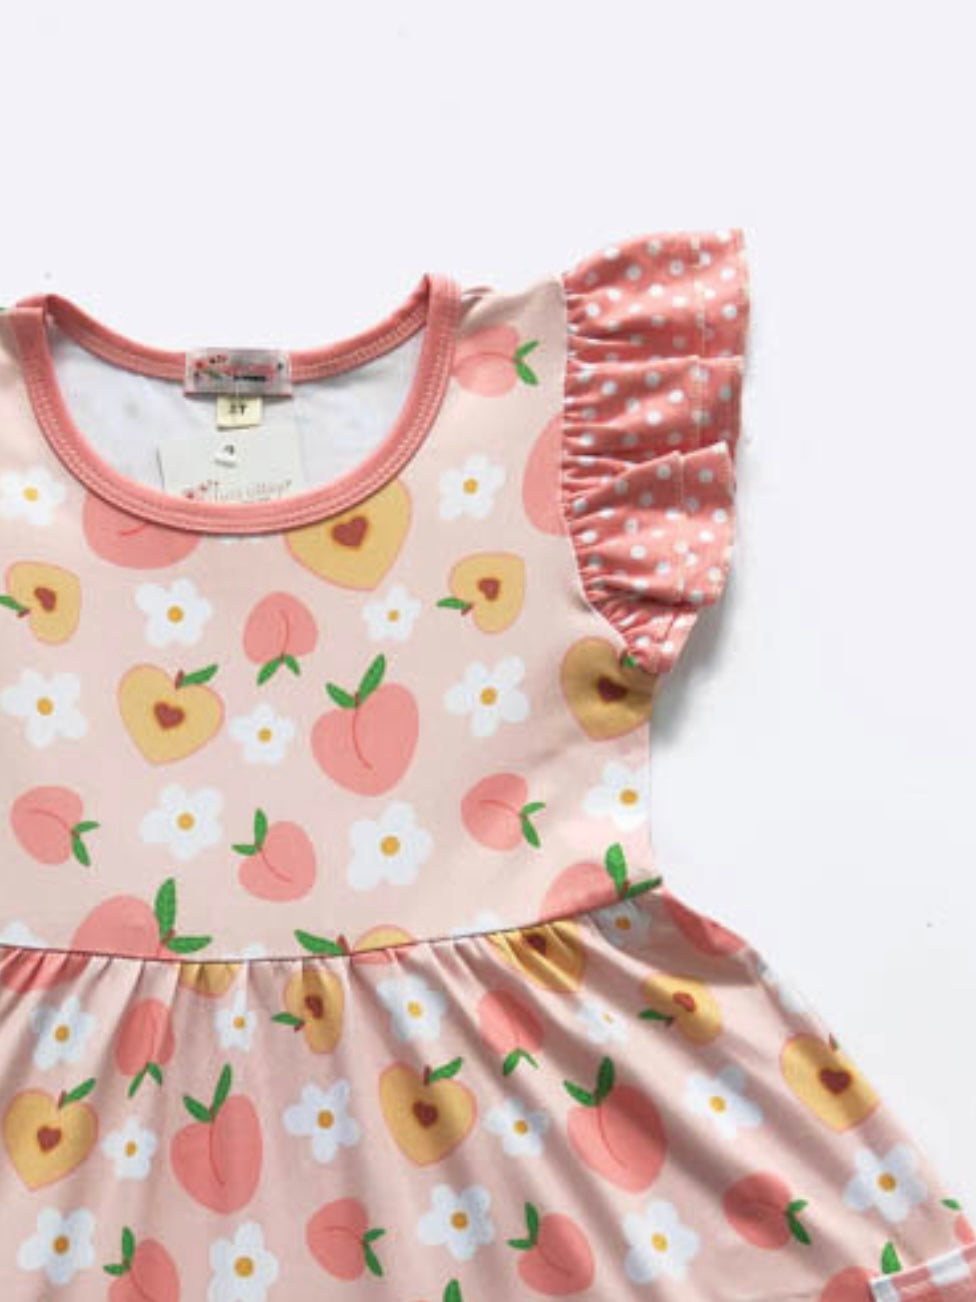 Peach Blossom Dress by Clover Cottage